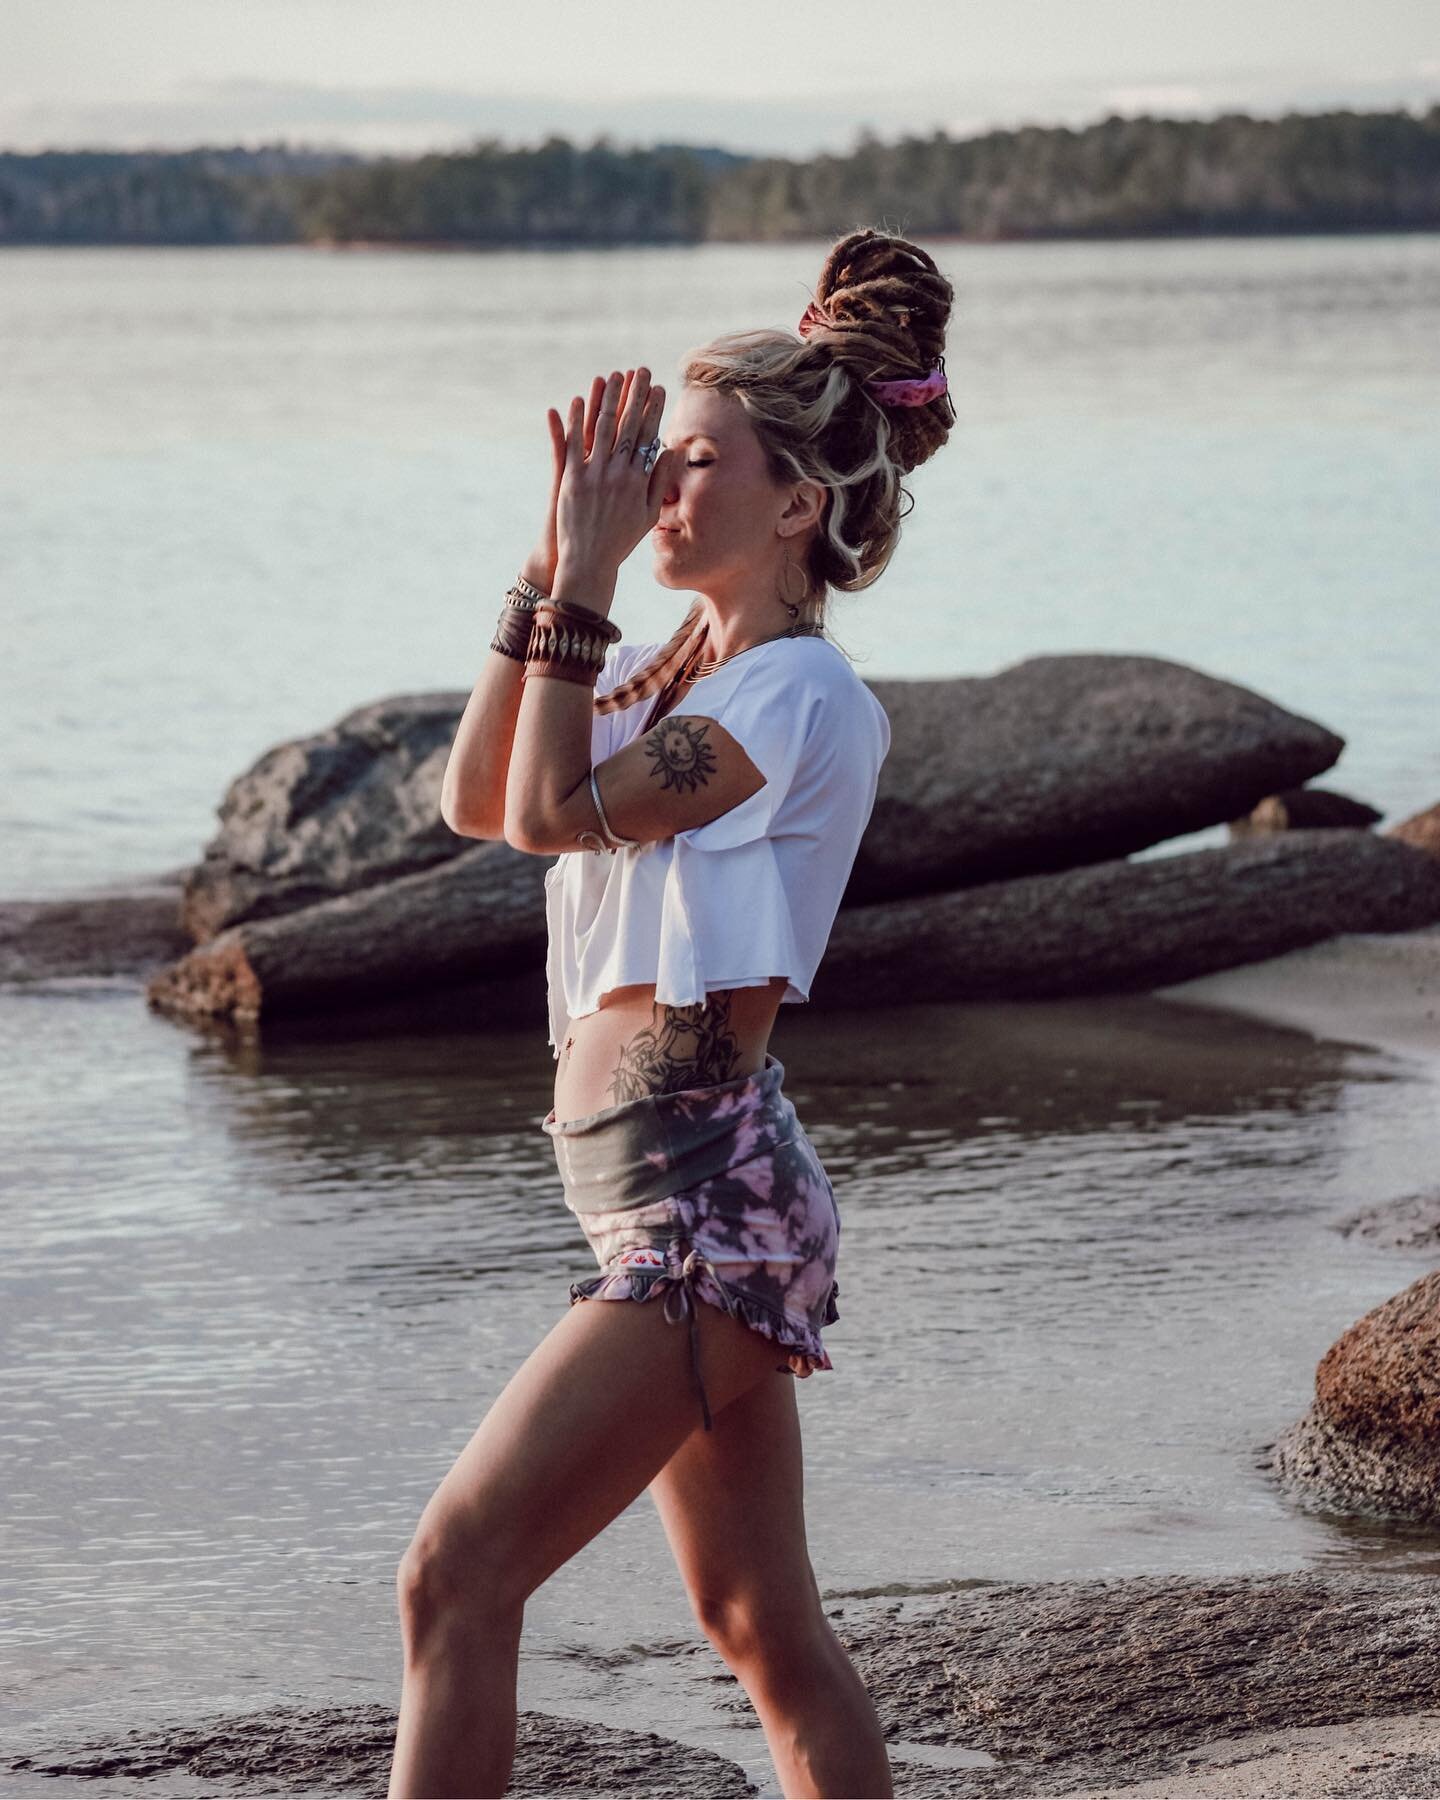 The Mady Shortie Shorts are a best seller for a reason! 

They&rsquo;re super cute and super comfy! What more could you ask for?✨

Snag a pair online (link in bio!) before they sell out🤗
.
.
.
#yogapractice #namaste #lotus #yogaeverydamnday #yogaeve